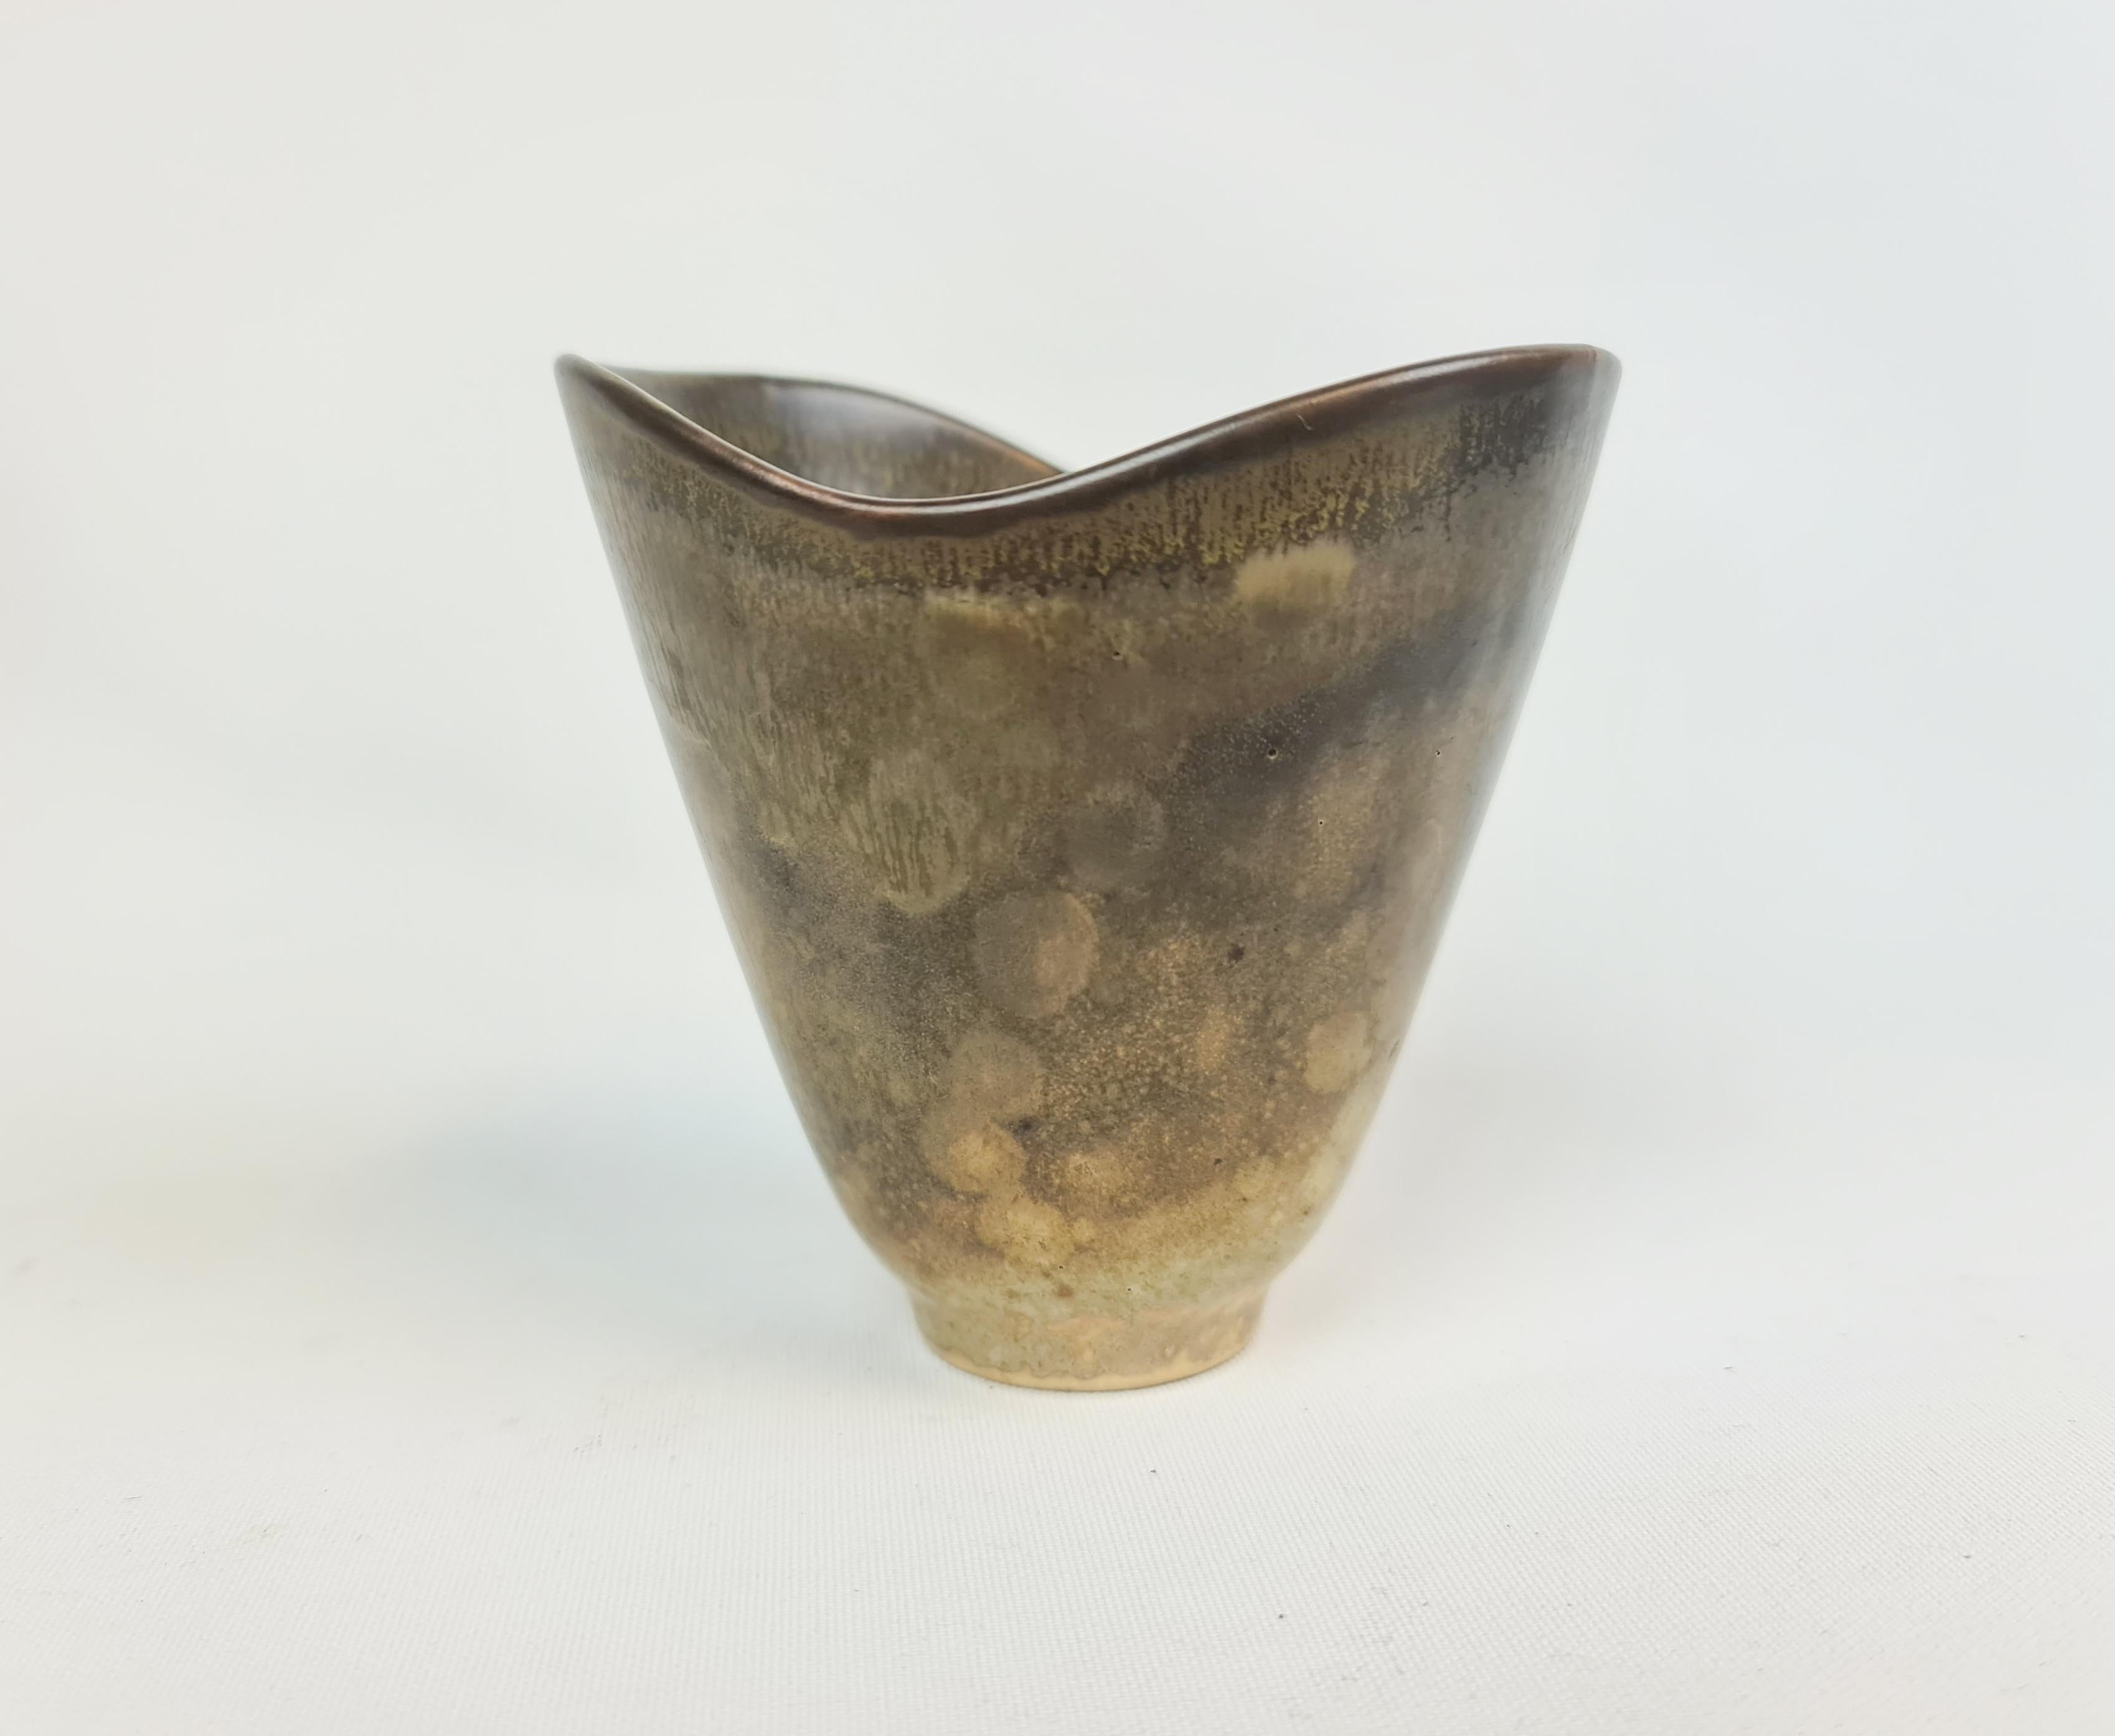 Wonderful vase made in Sweden 1950s at Rörstrand and designed by Carl-Harry Stålhane.
The vase has beautiful lines and a nice glaze.

Very good condition. 

Measures: H 1 cm, W 10 cm, D 9 cm.